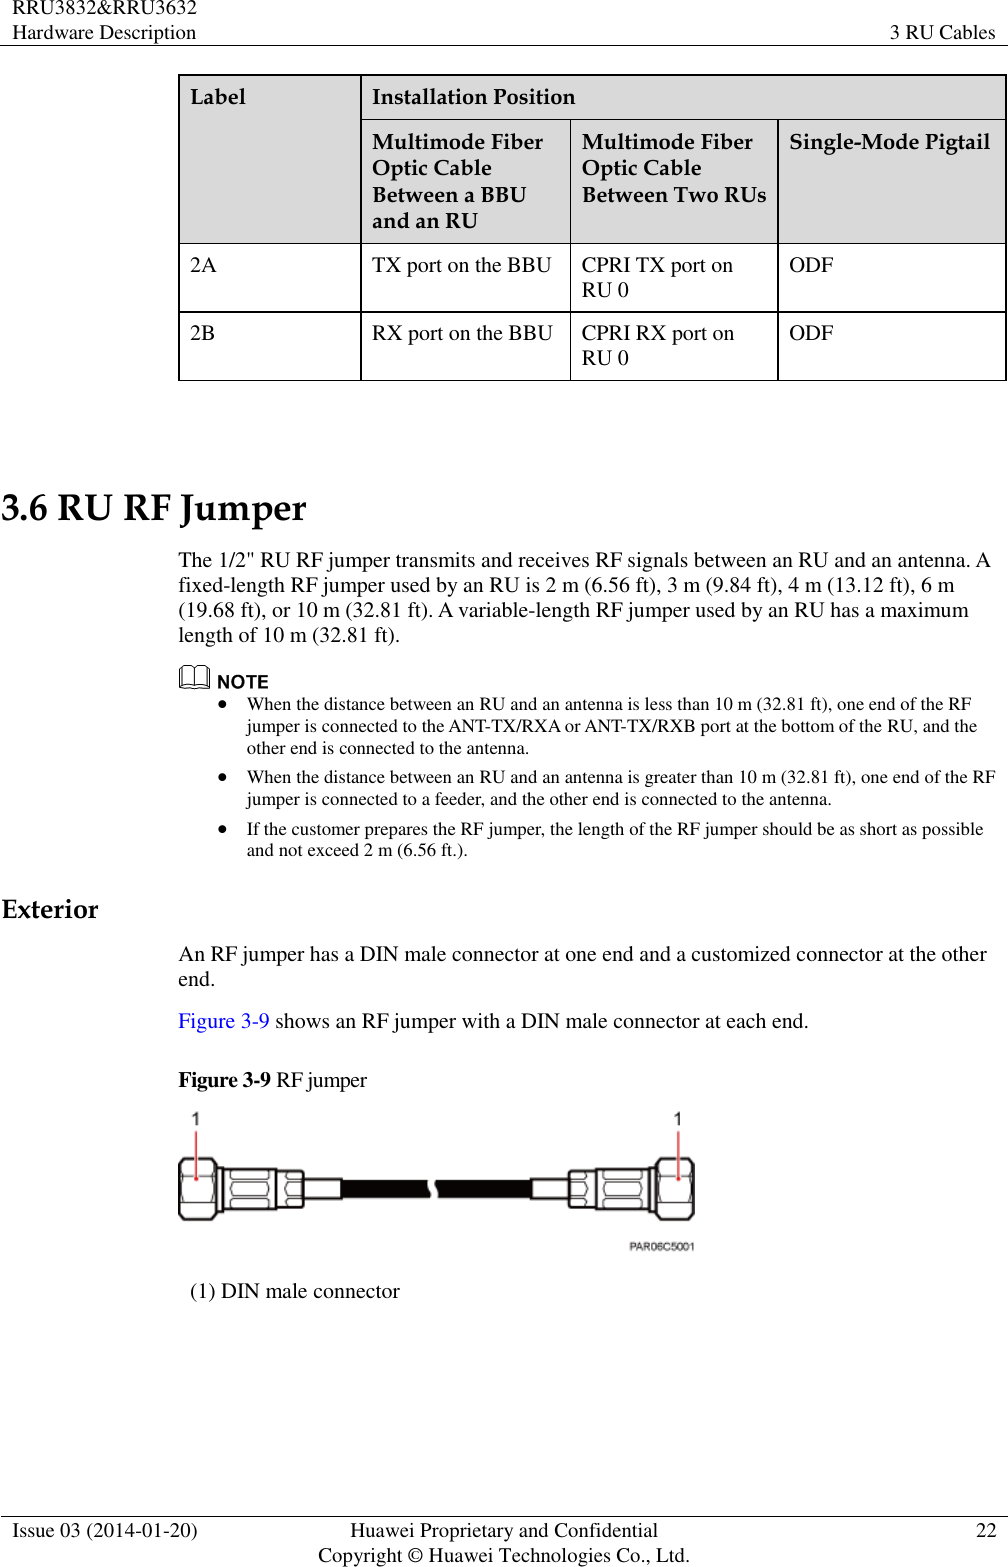 RRU3832&amp;RRU3632 Hardware Description 3 RU Cables  Issue 03 (2014-01-20) Huawei Proprietary and Confidential                                     Copyright © Huawei Technologies Co., Ltd. 22  Label Installation Position Multimode Fiber Optic Cable Between a BBU and an RU Multimode Fiber Optic Cable Between Two RUs Single-Mode Pigtail 2A TX port on the BBU CPRI TX port on RU 0 ODF 2B RX port on the BBU CPRI RX port on RU 0 ODF  3.6 RU RF Jumper The 1/2&quot; RU RF jumper transmits and receives RF signals between an RU and an antenna. A fixed-length RF jumper used by an RU is 2 m (6.56 ft), 3 m (9.84 ft), 4 m (13.12 ft), 6 m (19.68 ft), or 10 m (32.81 ft). A variable-length RF jumper used by an RU has a maximum length of 10 m (32.81 ft).   When the distance between an RU and an antenna is less than 10 m (32.81 ft), one end of the RF jumper is connected to the ANT-TX/RXA or ANT-TX/RXB port at the bottom of the RU, and the other end is connected to the antenna.  When the distance between an RU and an antenna is greater than 10 m (32.81 ft), one end of the RF jumper is connected to a feeder, and the other end is connected to the antenna.  If the customer prepares the RF jumper, the length of the RF jumper should be as short as possible and not exceed 2 m (6.56 ft.). Exterior An RF jumper has a DIN male connector at one end and a customized connector at the other end. Figure 3-9 shows an RF jumper with a DIN male connector at each end.   Figure 3-9 RF jumper  (1) DIN male connector  